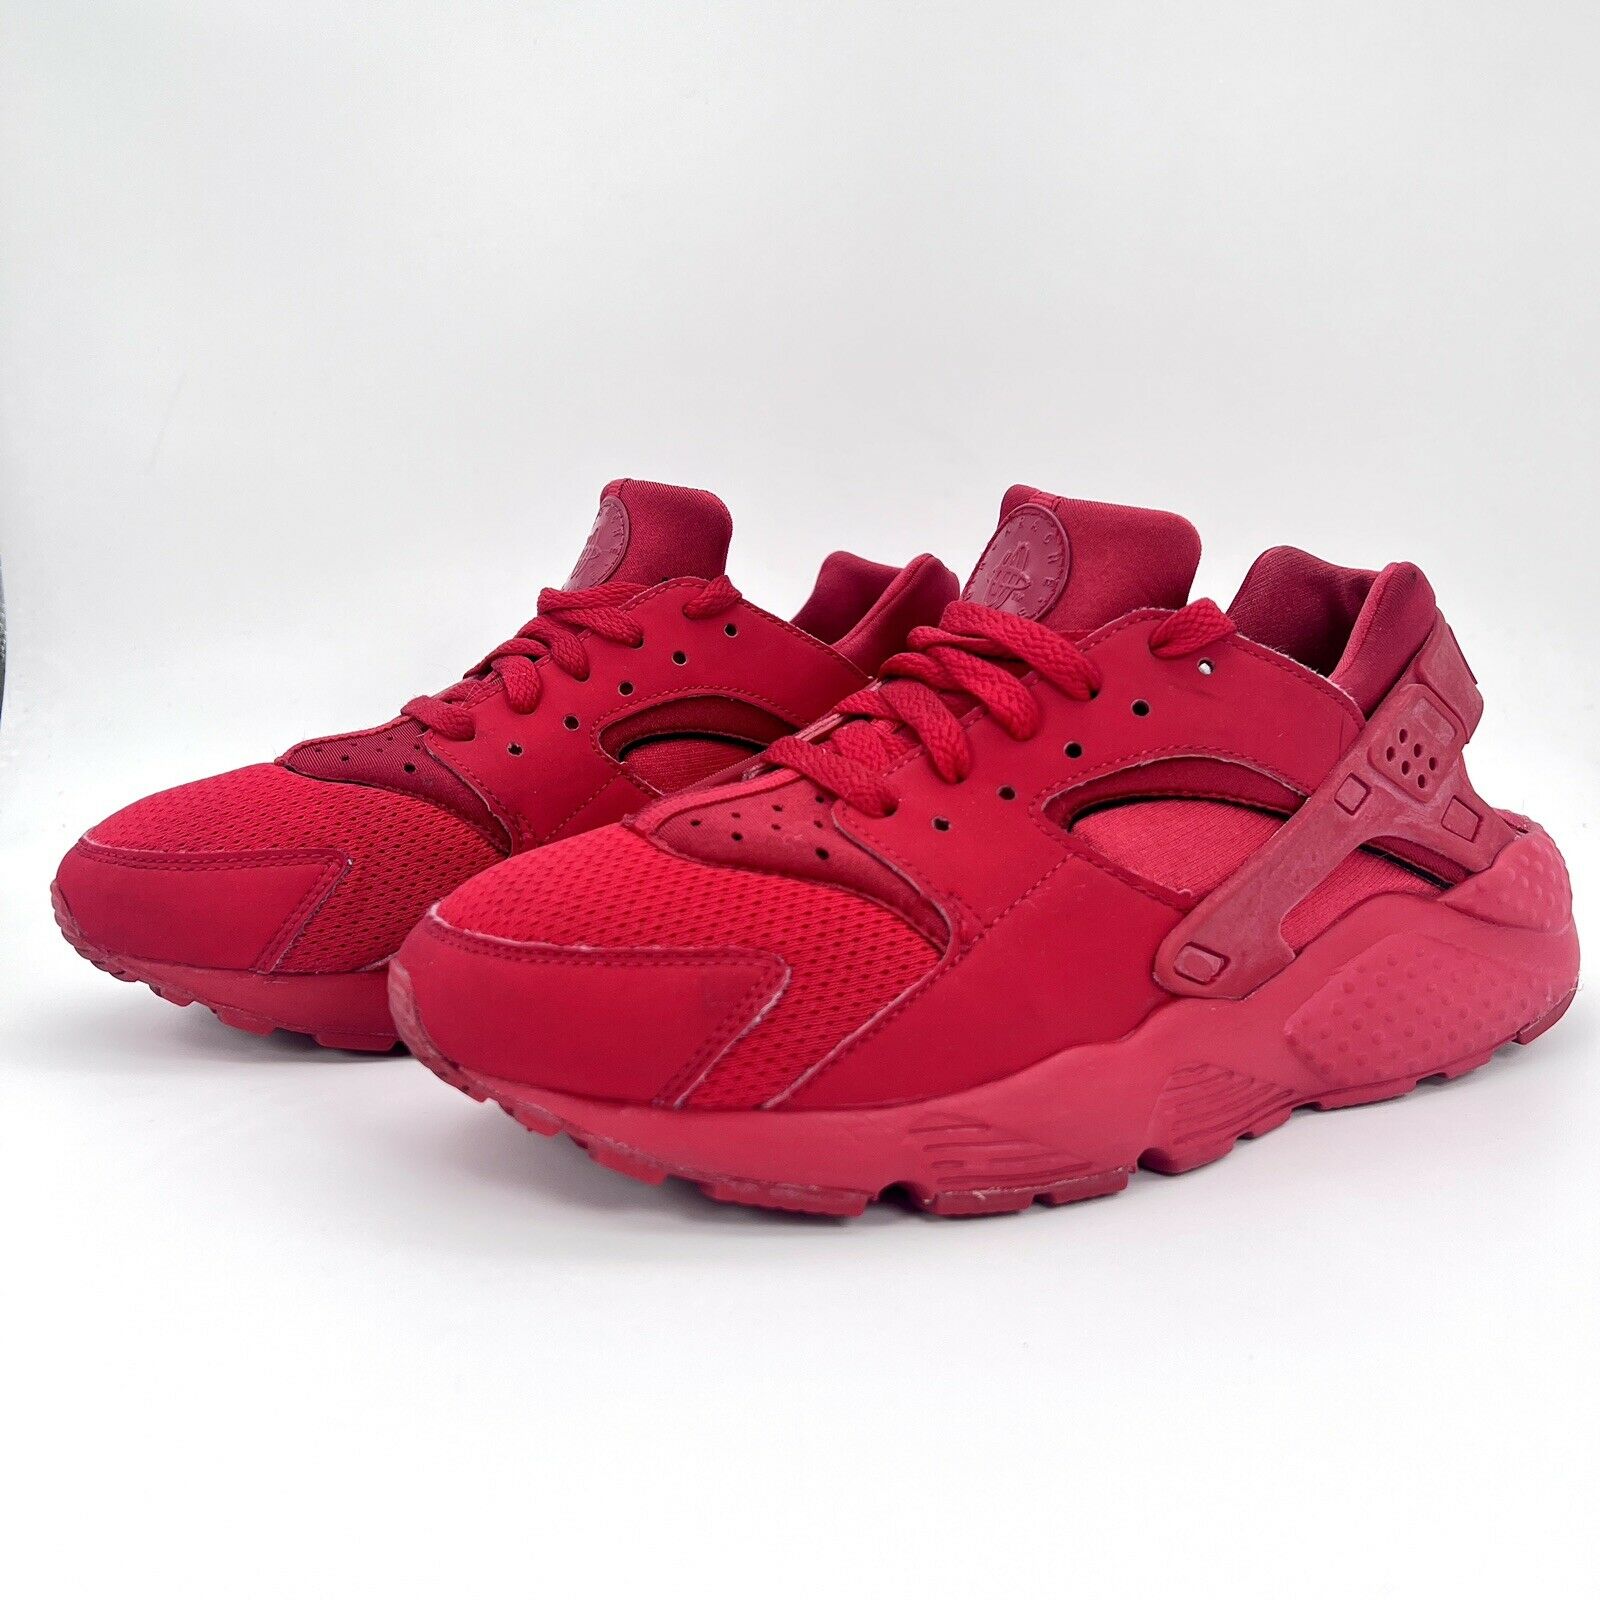 Nike Air Huarache Run Triple Red Running Shoes Style 654275-600 Youth Size 7Y